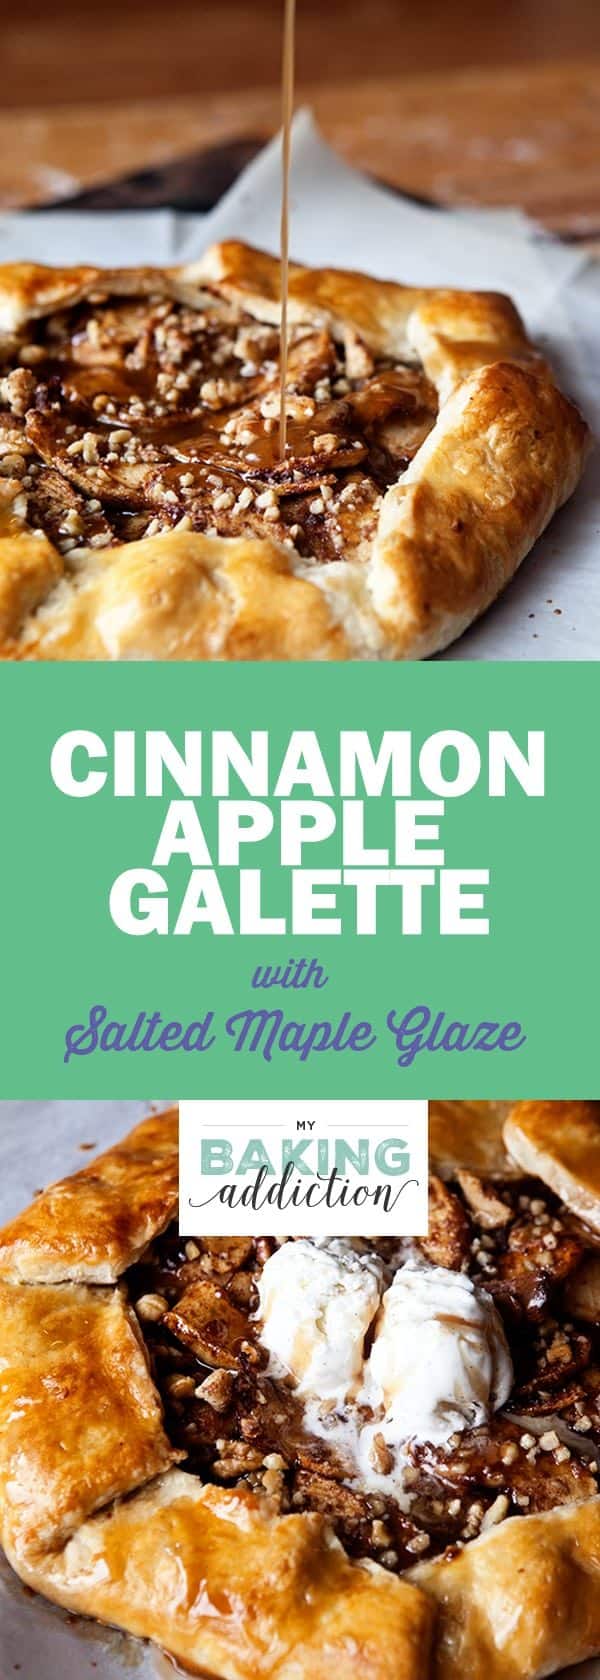 This Cinnamon Apple Galette is easier than pie, but just as delicious. Perfect for fall!